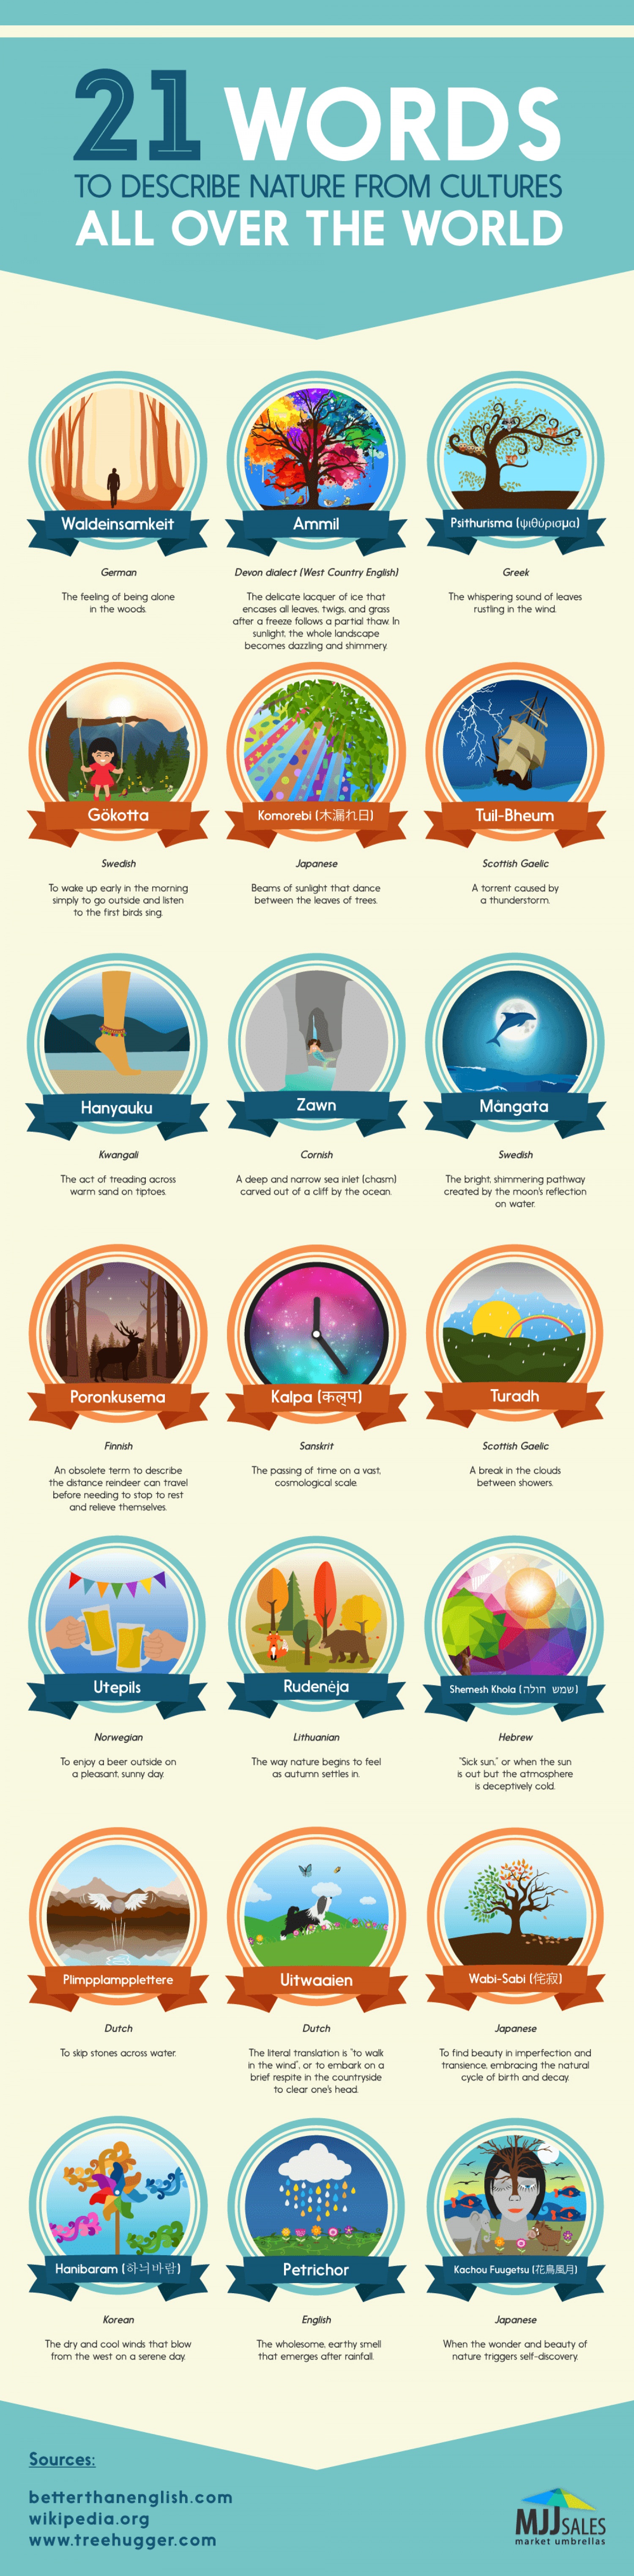 21 Words to Describe Nature From Cultures All Over the World